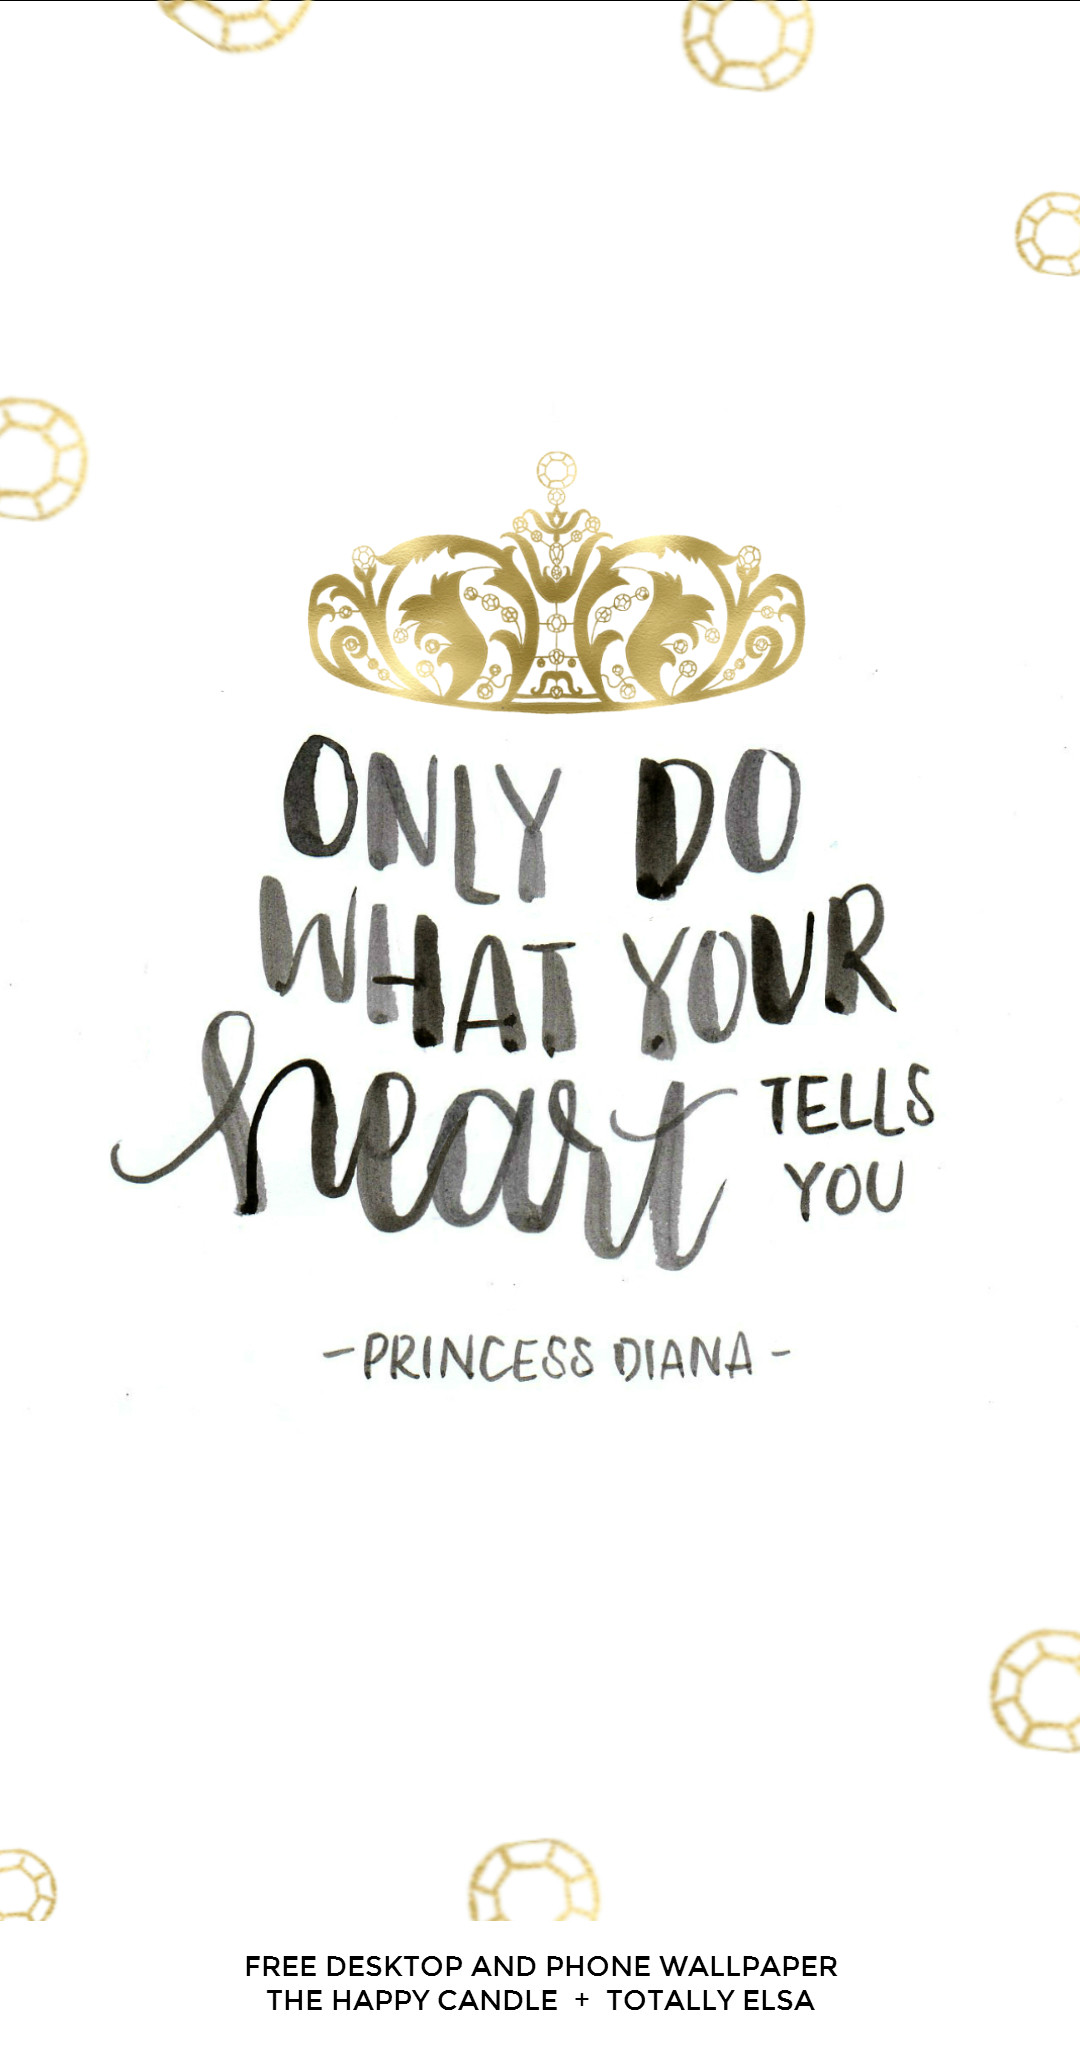 A free desktop and phone wallpaper with a quote from Princess Diana / Created by The